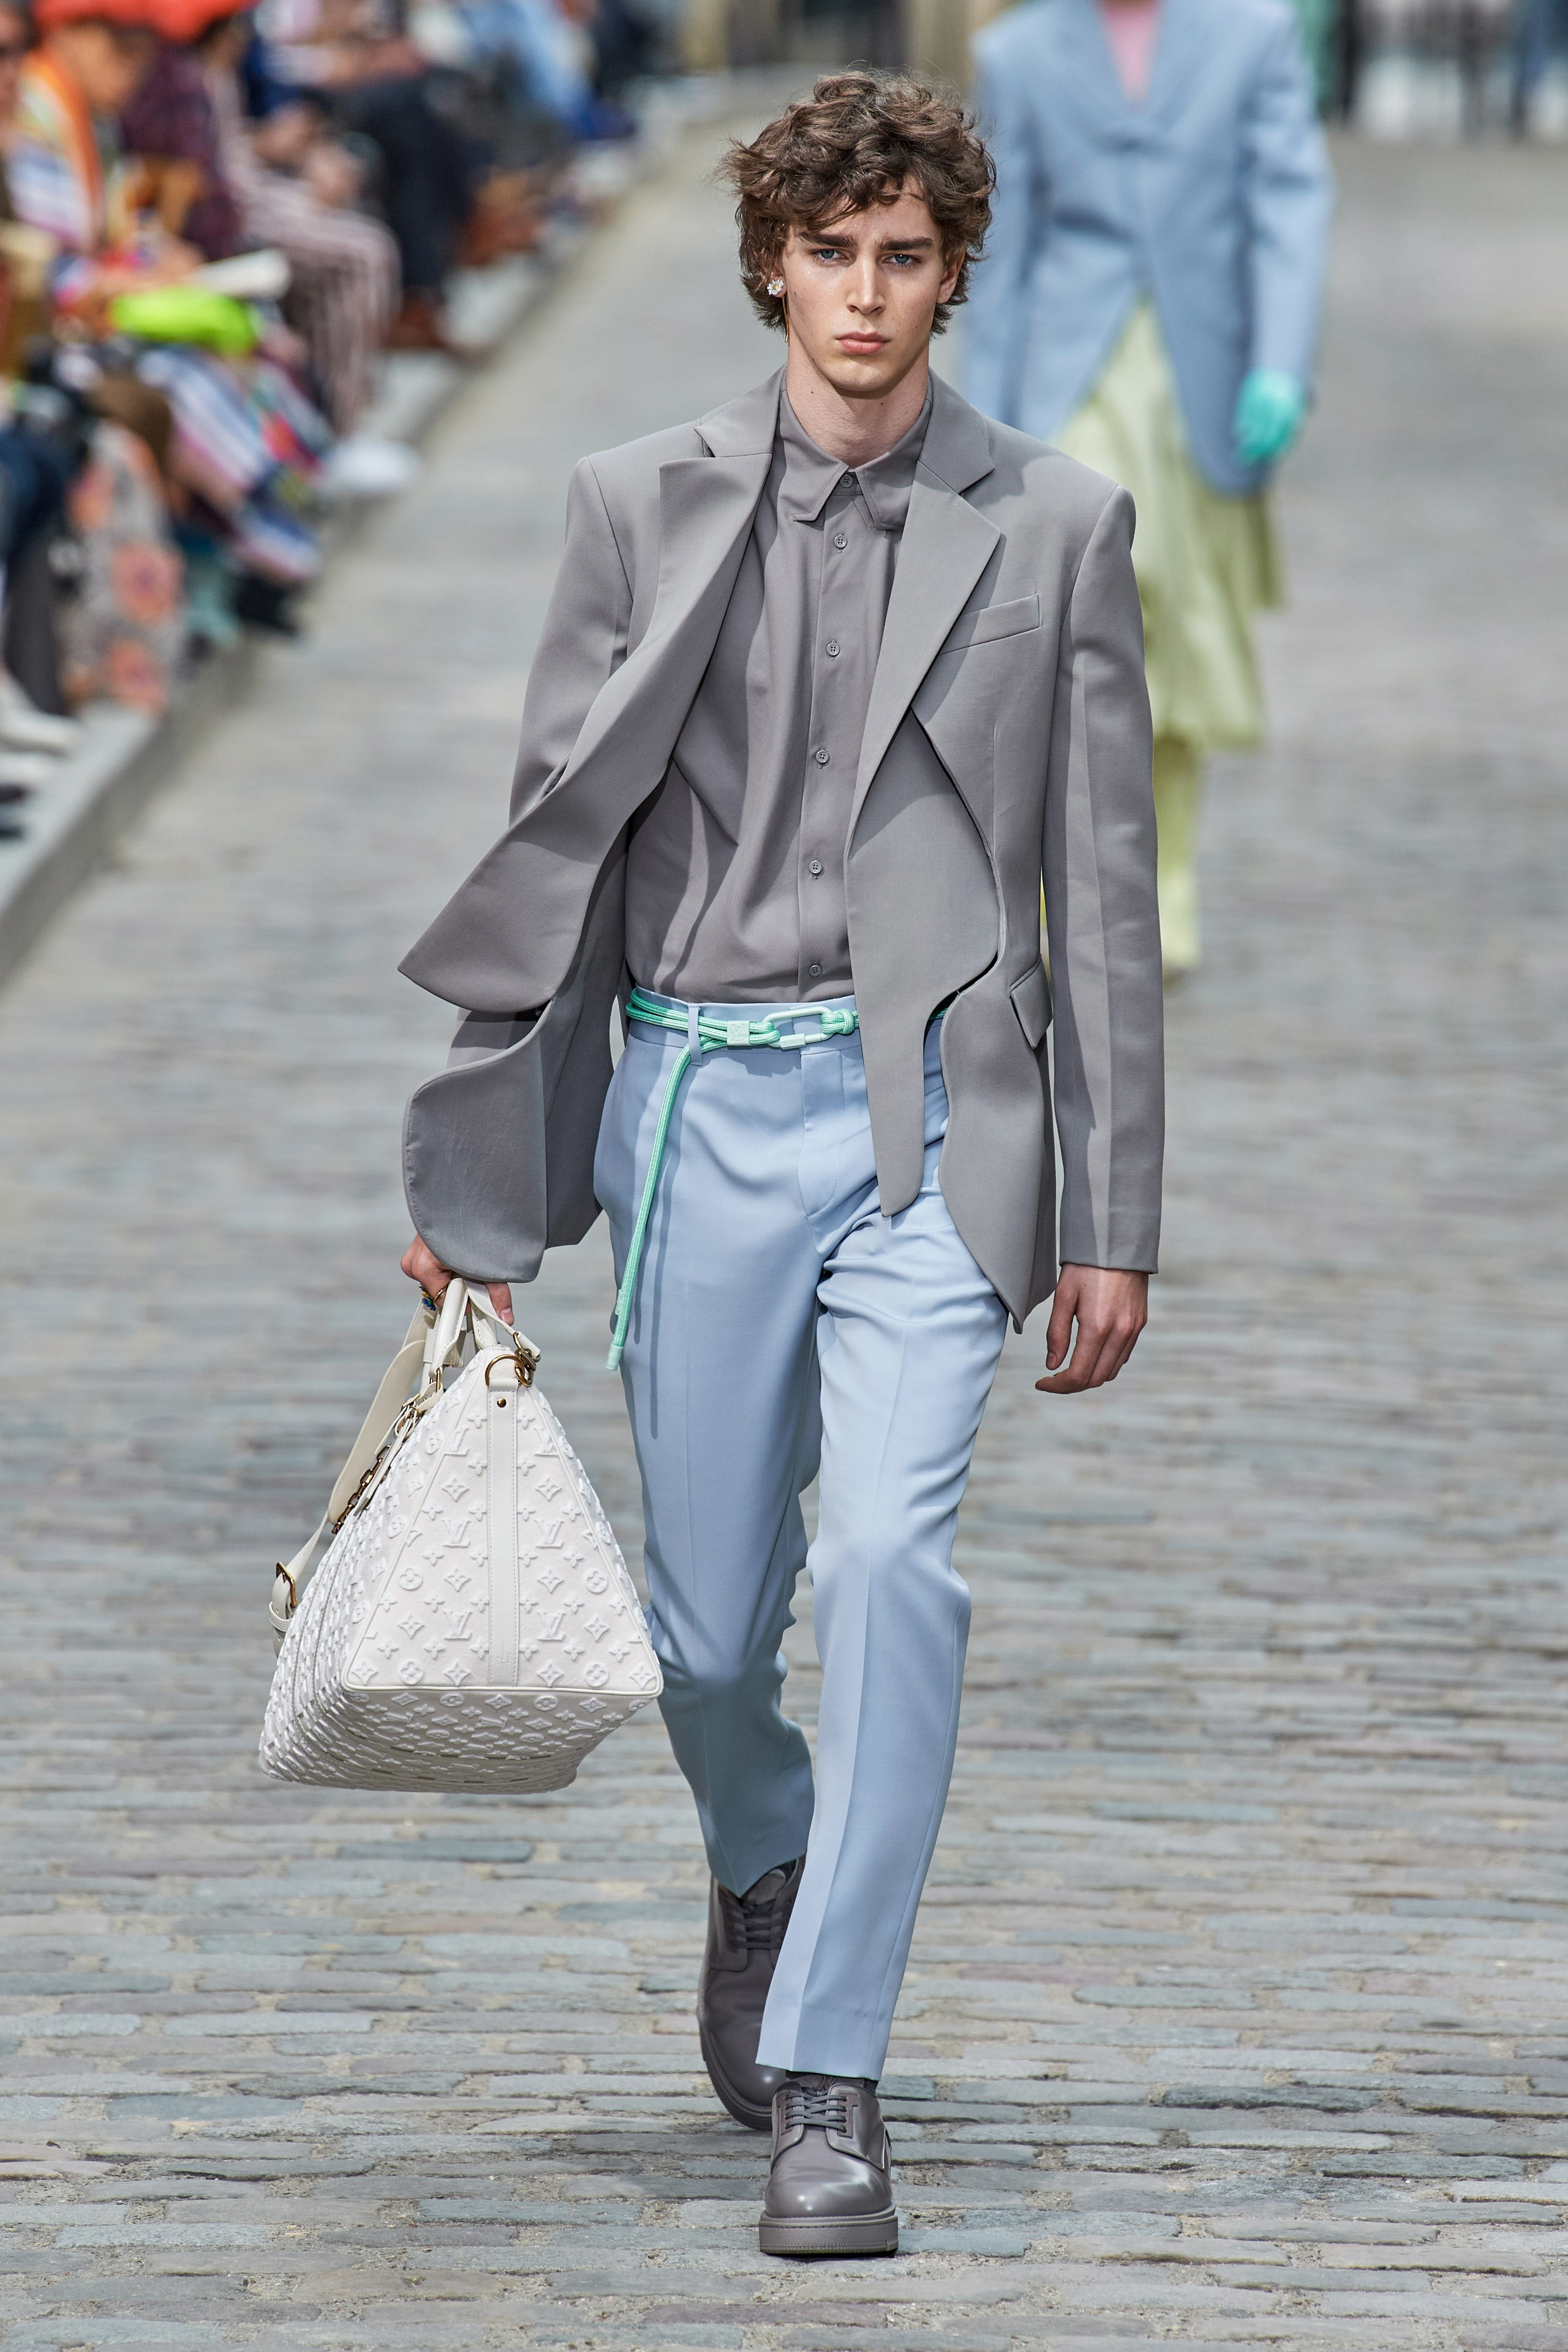 The men's bag trend is on the rise… here are the runway highlights